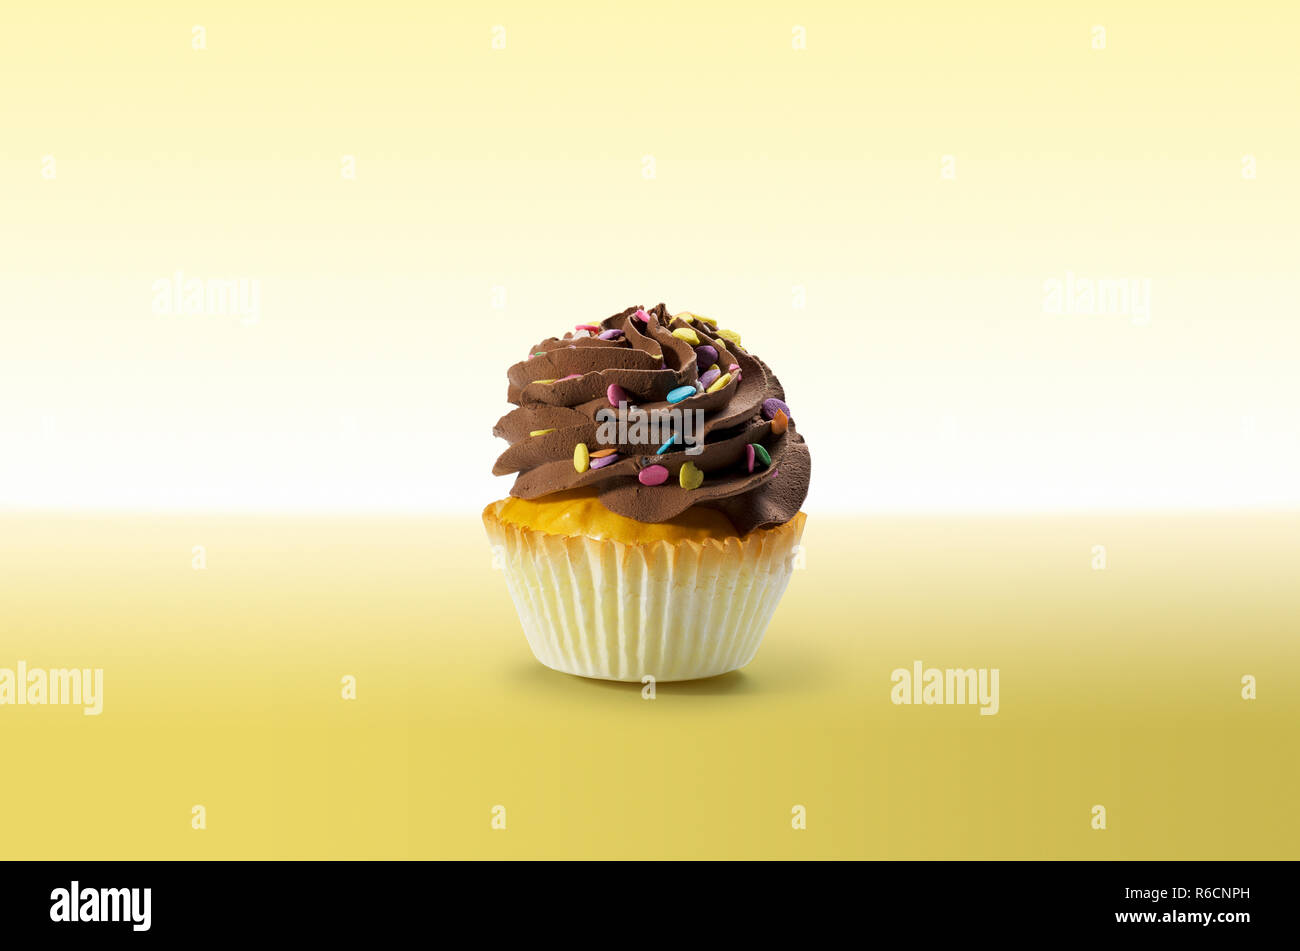 Cupcake with chocolate frosting on a yellow surface Stock Photo